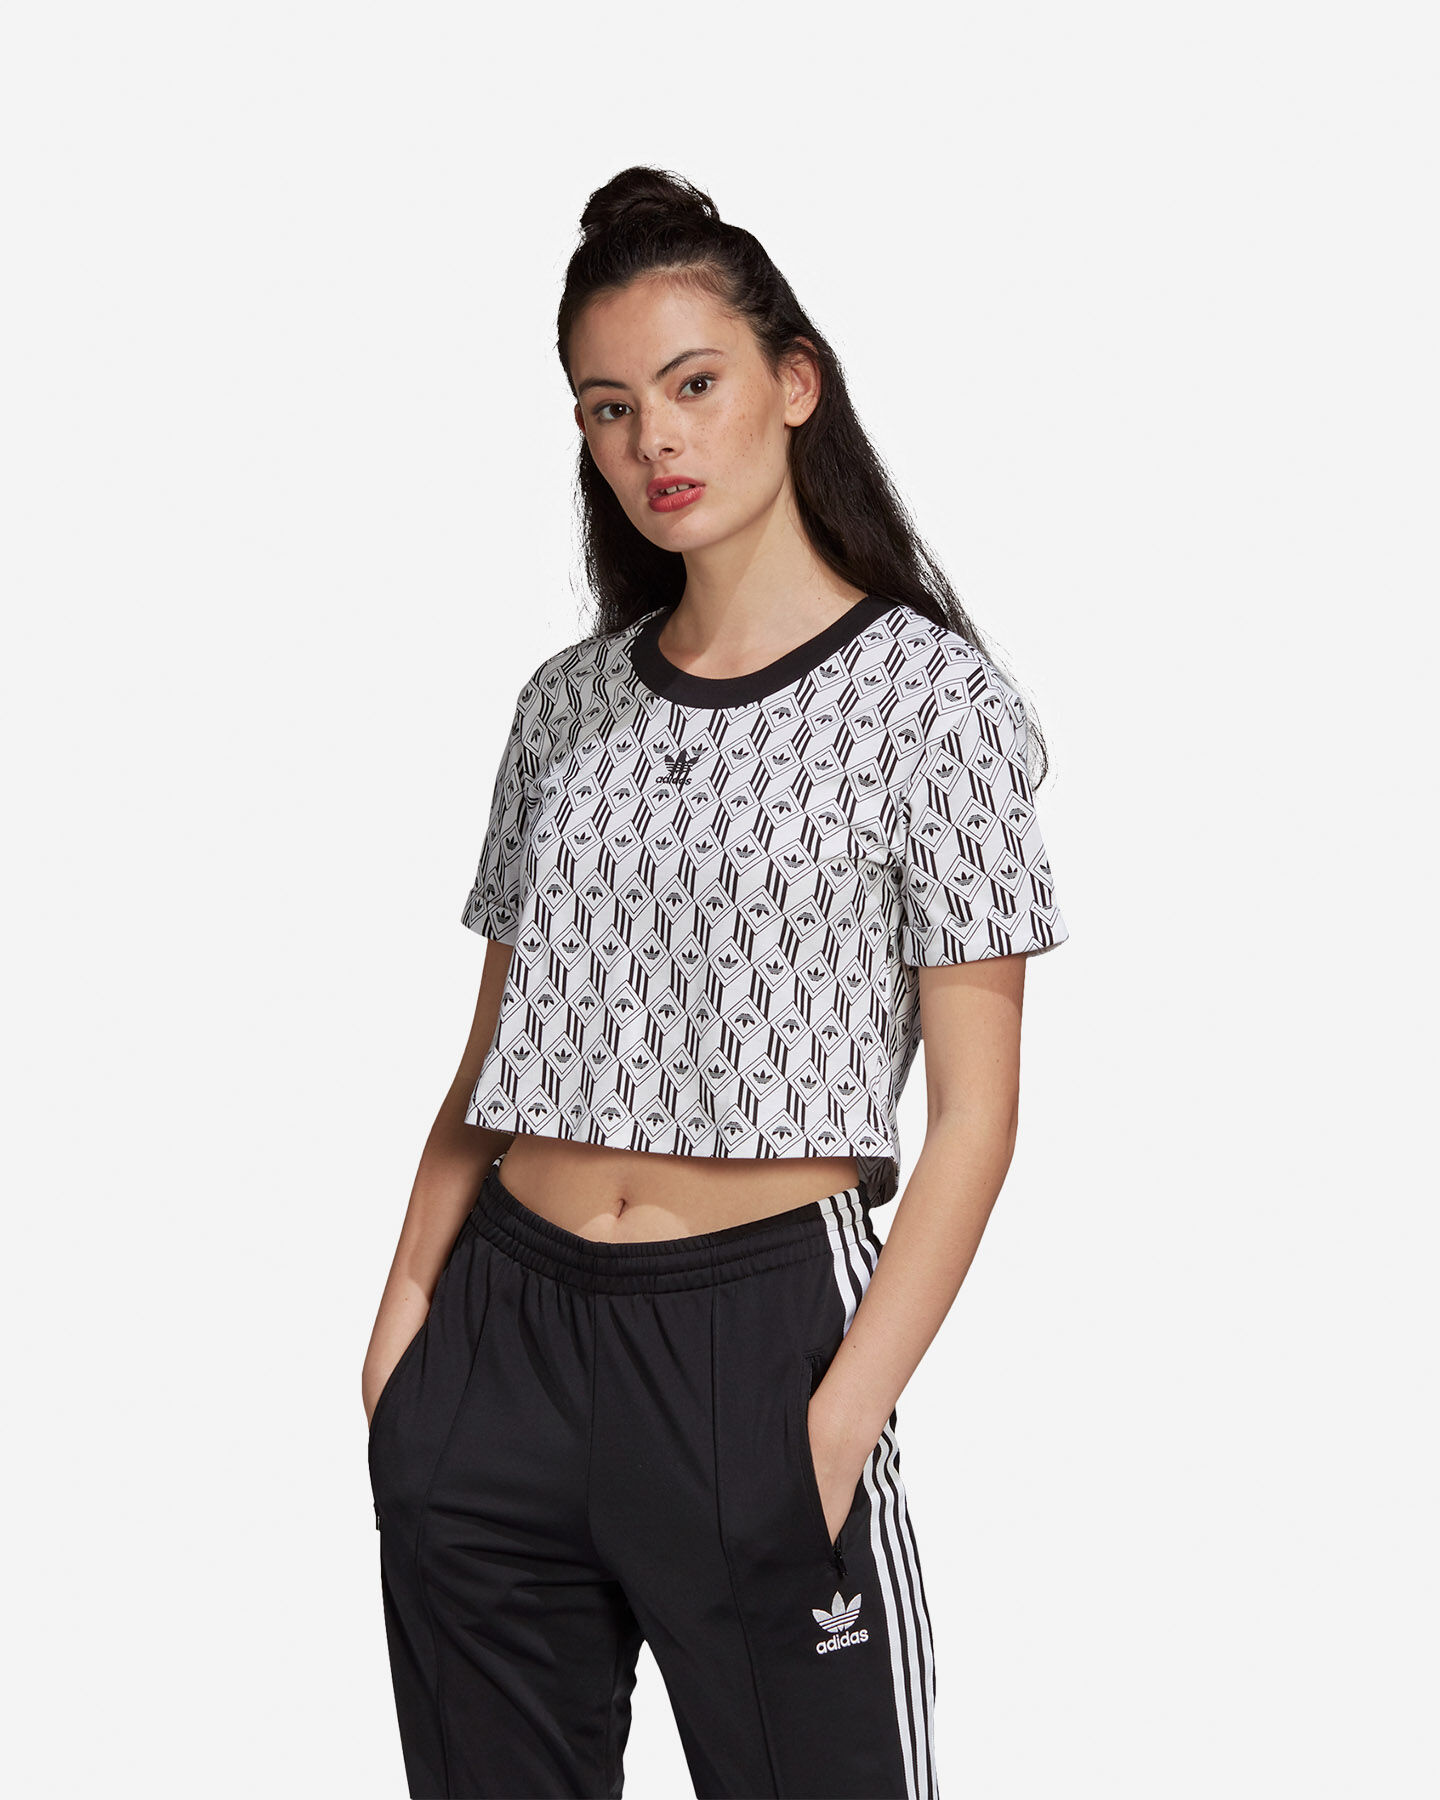  T-Shirt ADIDAS CROPPED W S5147721|UNI|38 scatto 2